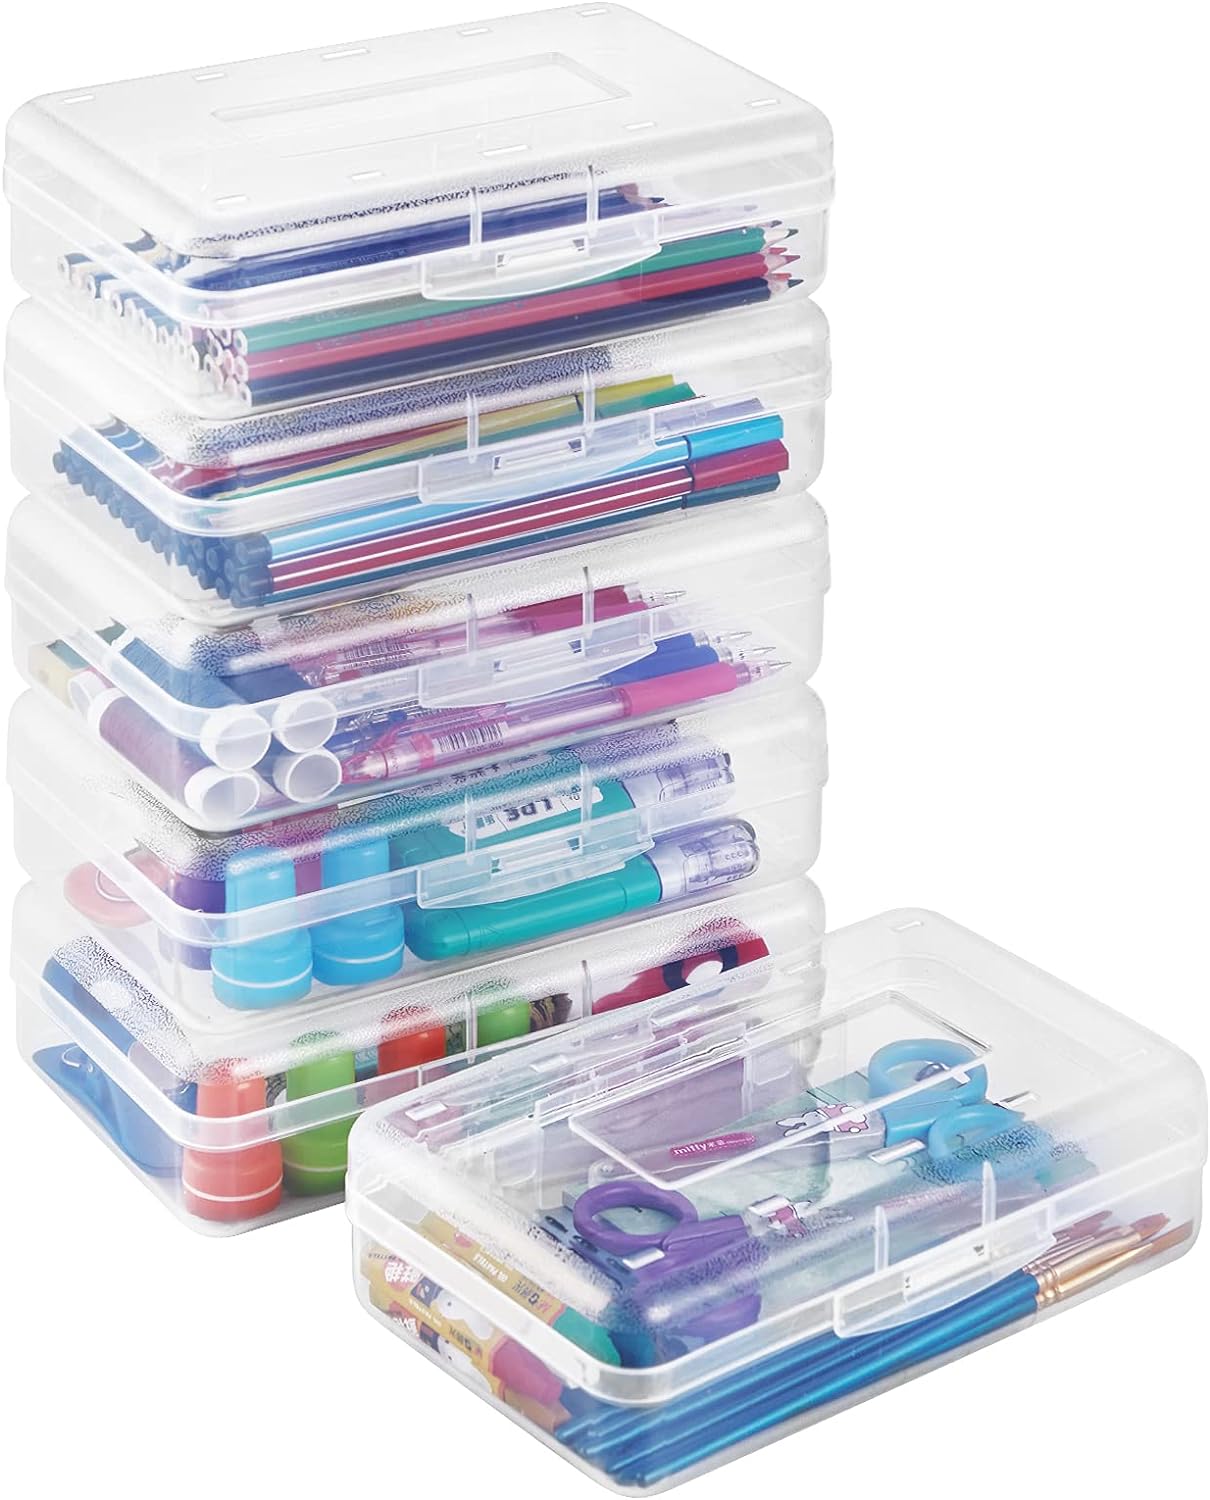 Sooez 6 Pack Clear Pencil Box, Plastic Large Capacity with Snap-tight Lid, Office Supplies Storage Organizer Stackable Design and Stylish